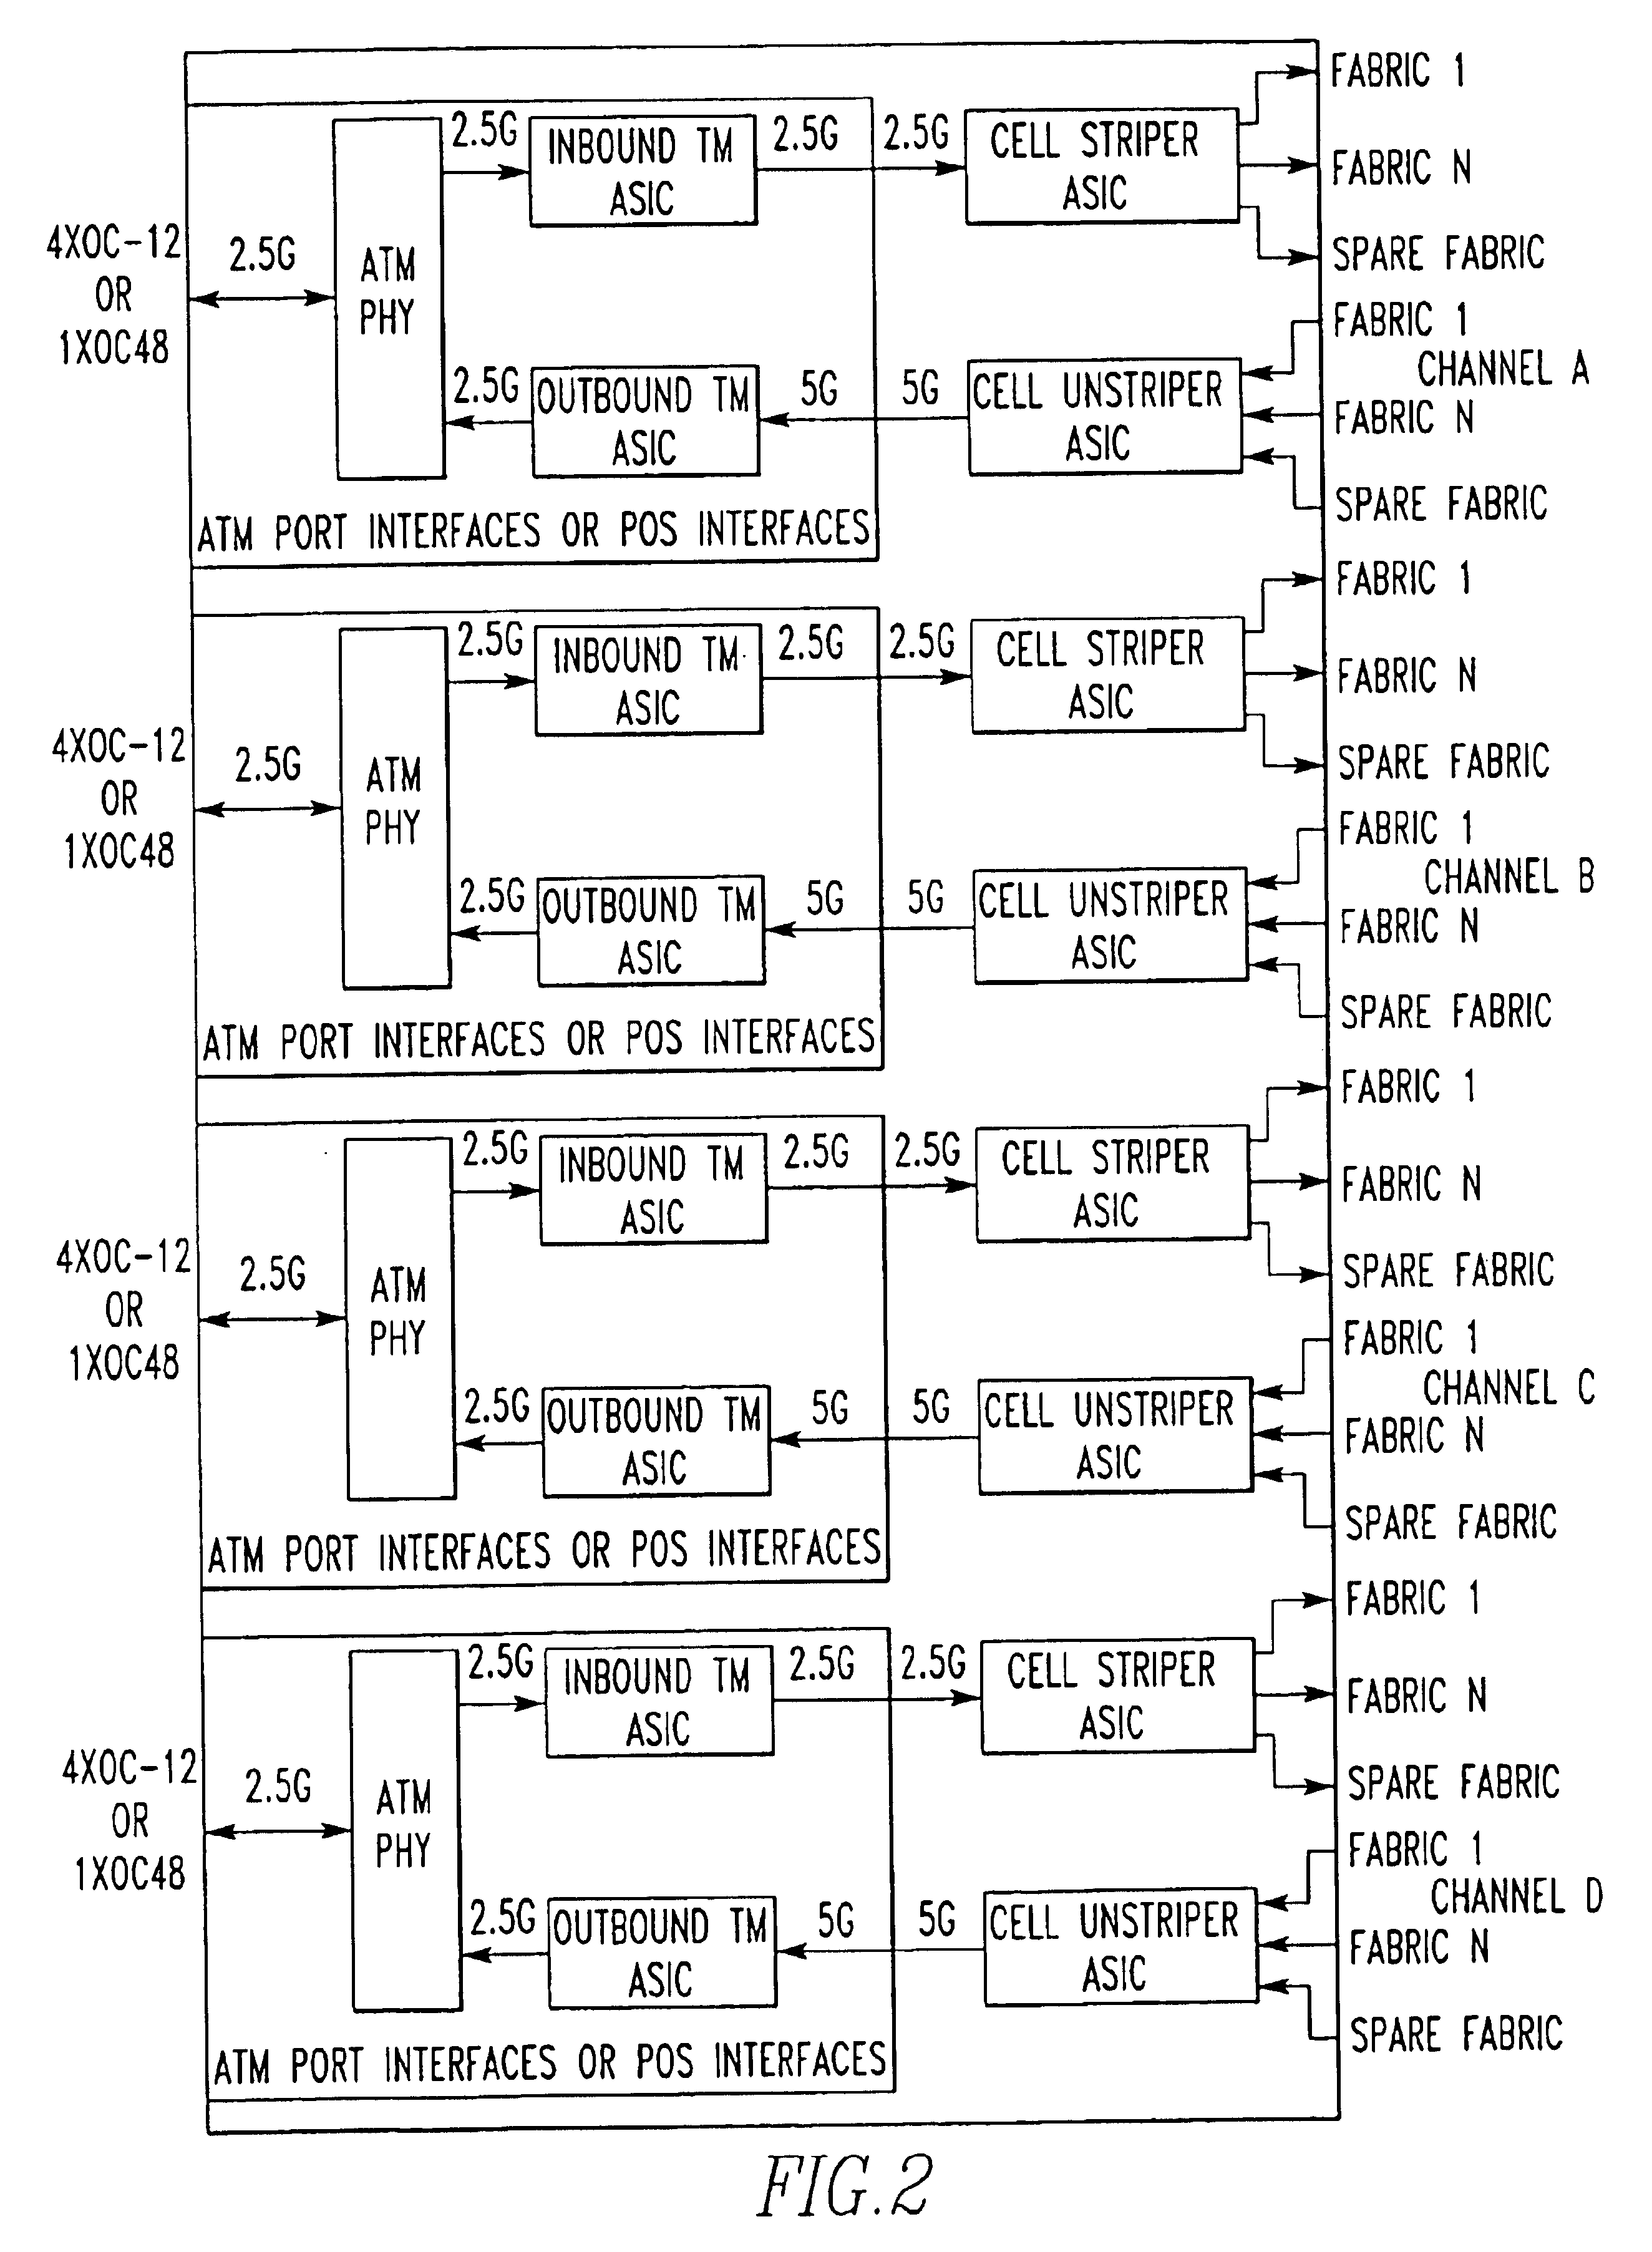 Receiver decoding algorithm to allow hitless N+1 redundancy in a switch